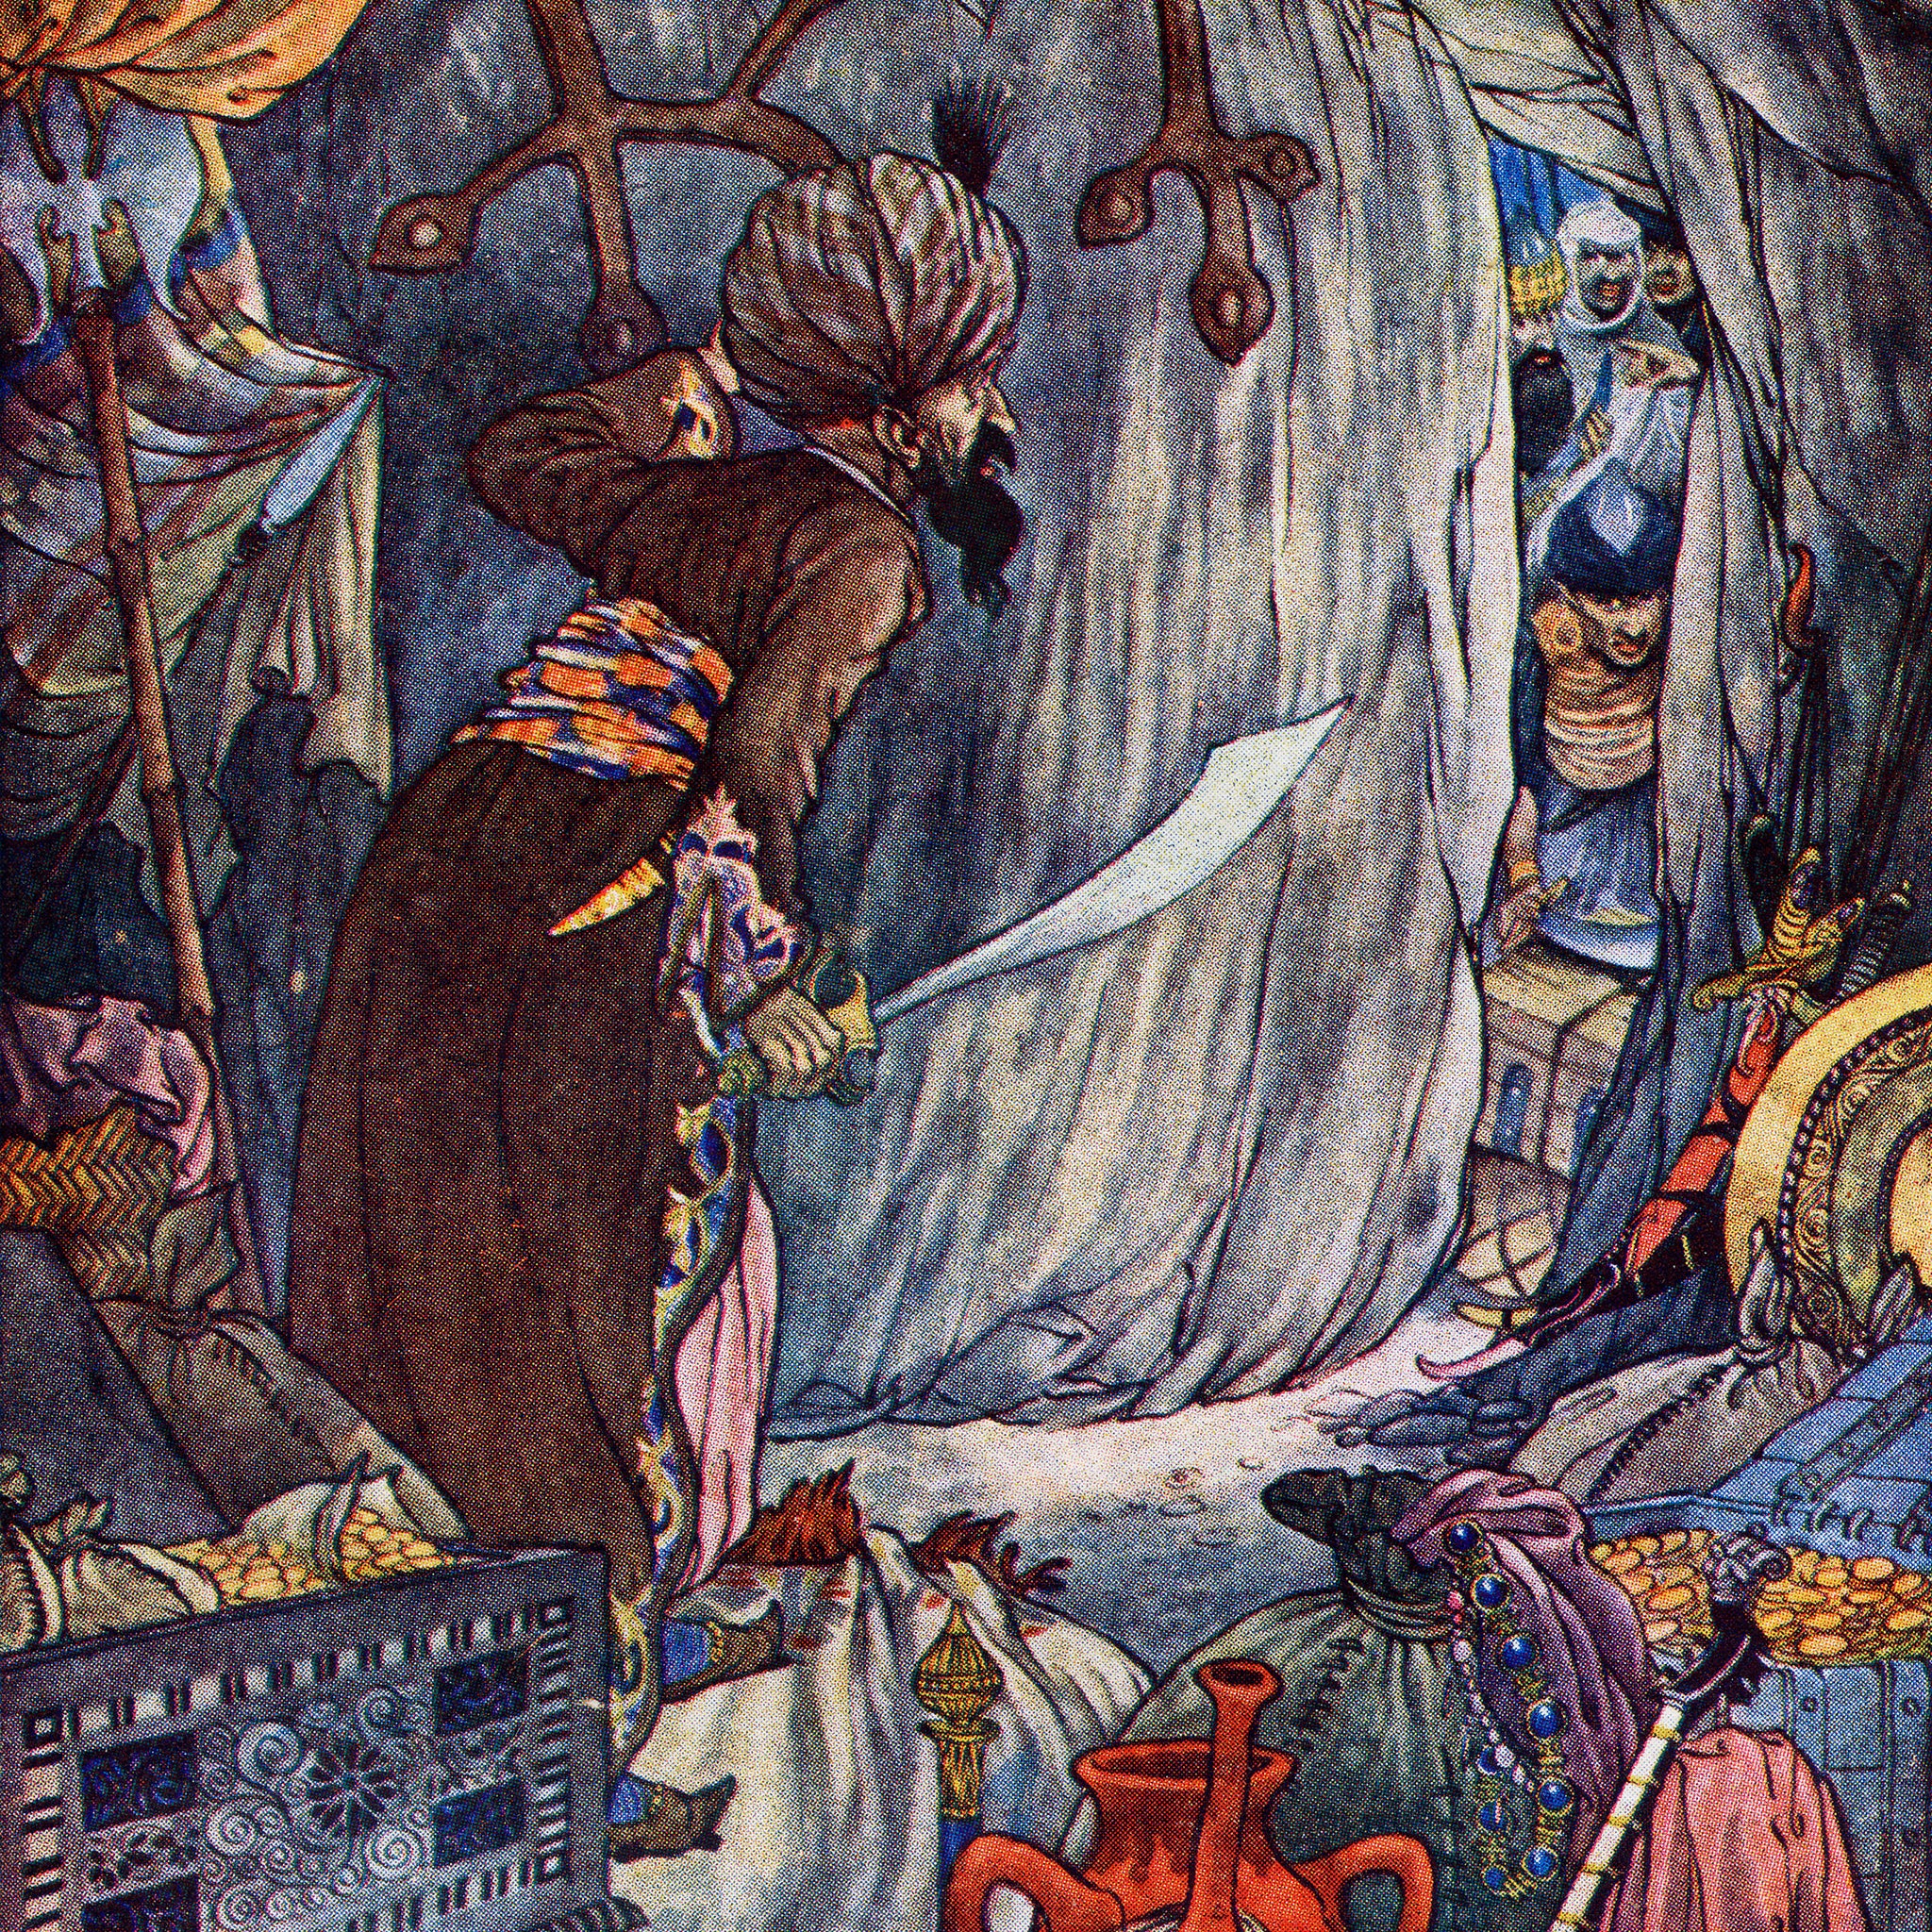 The History of Ali Baba and the Forty Thieves Illustration by Charles Folkard from The Arabian Nights (Hilary Morgan / Alamy)